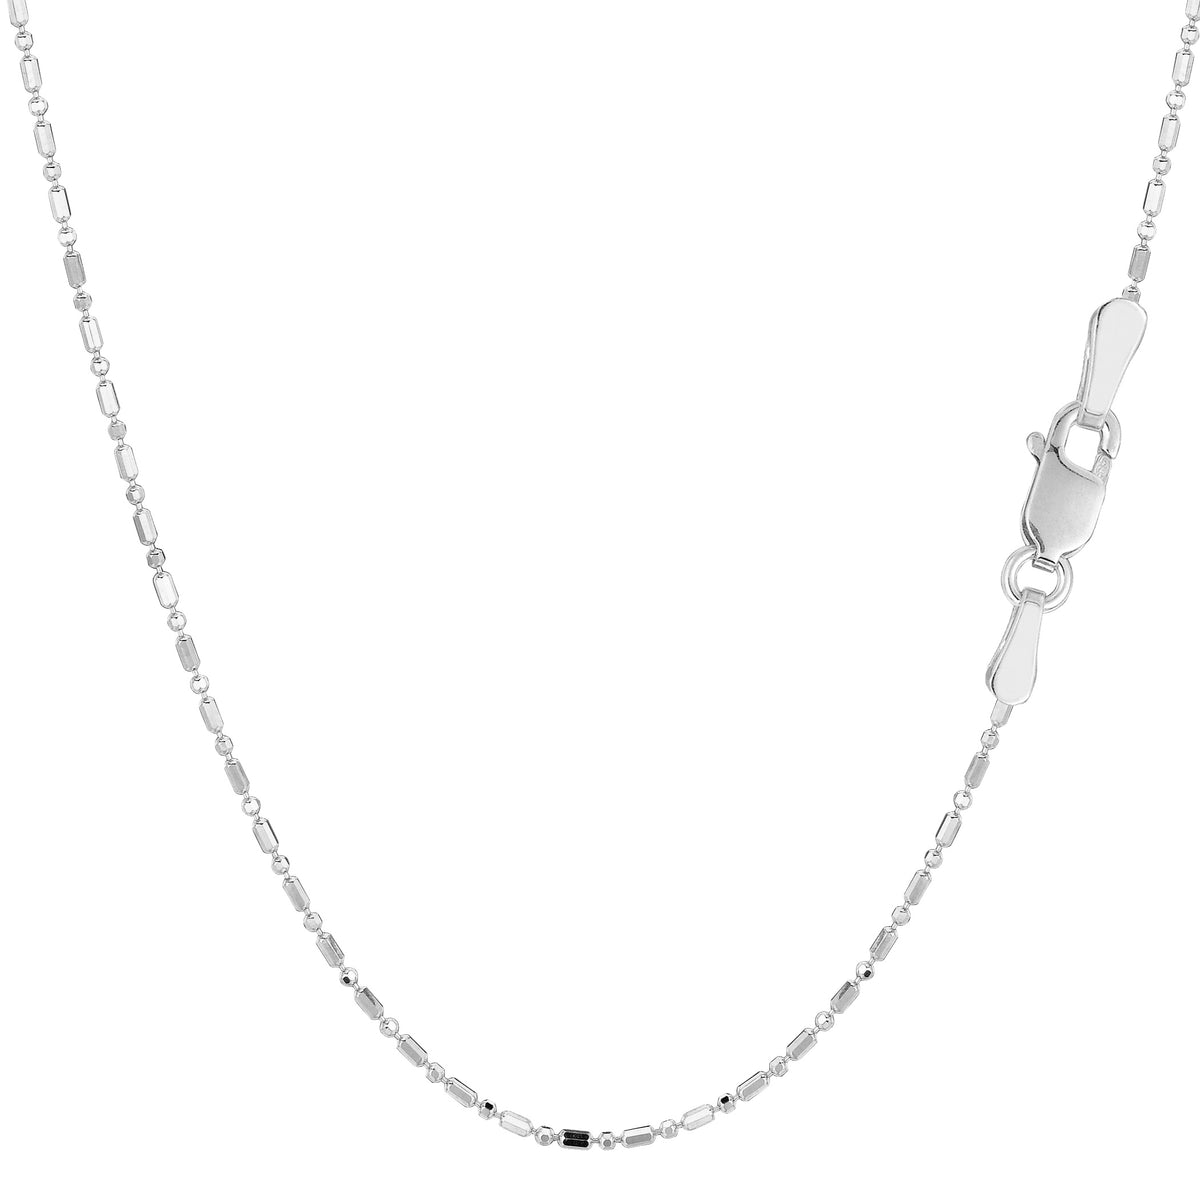 14k White Gold Diamond Cut Bead Chain Necklace, 1.0mm fine designer jewelry for men and women